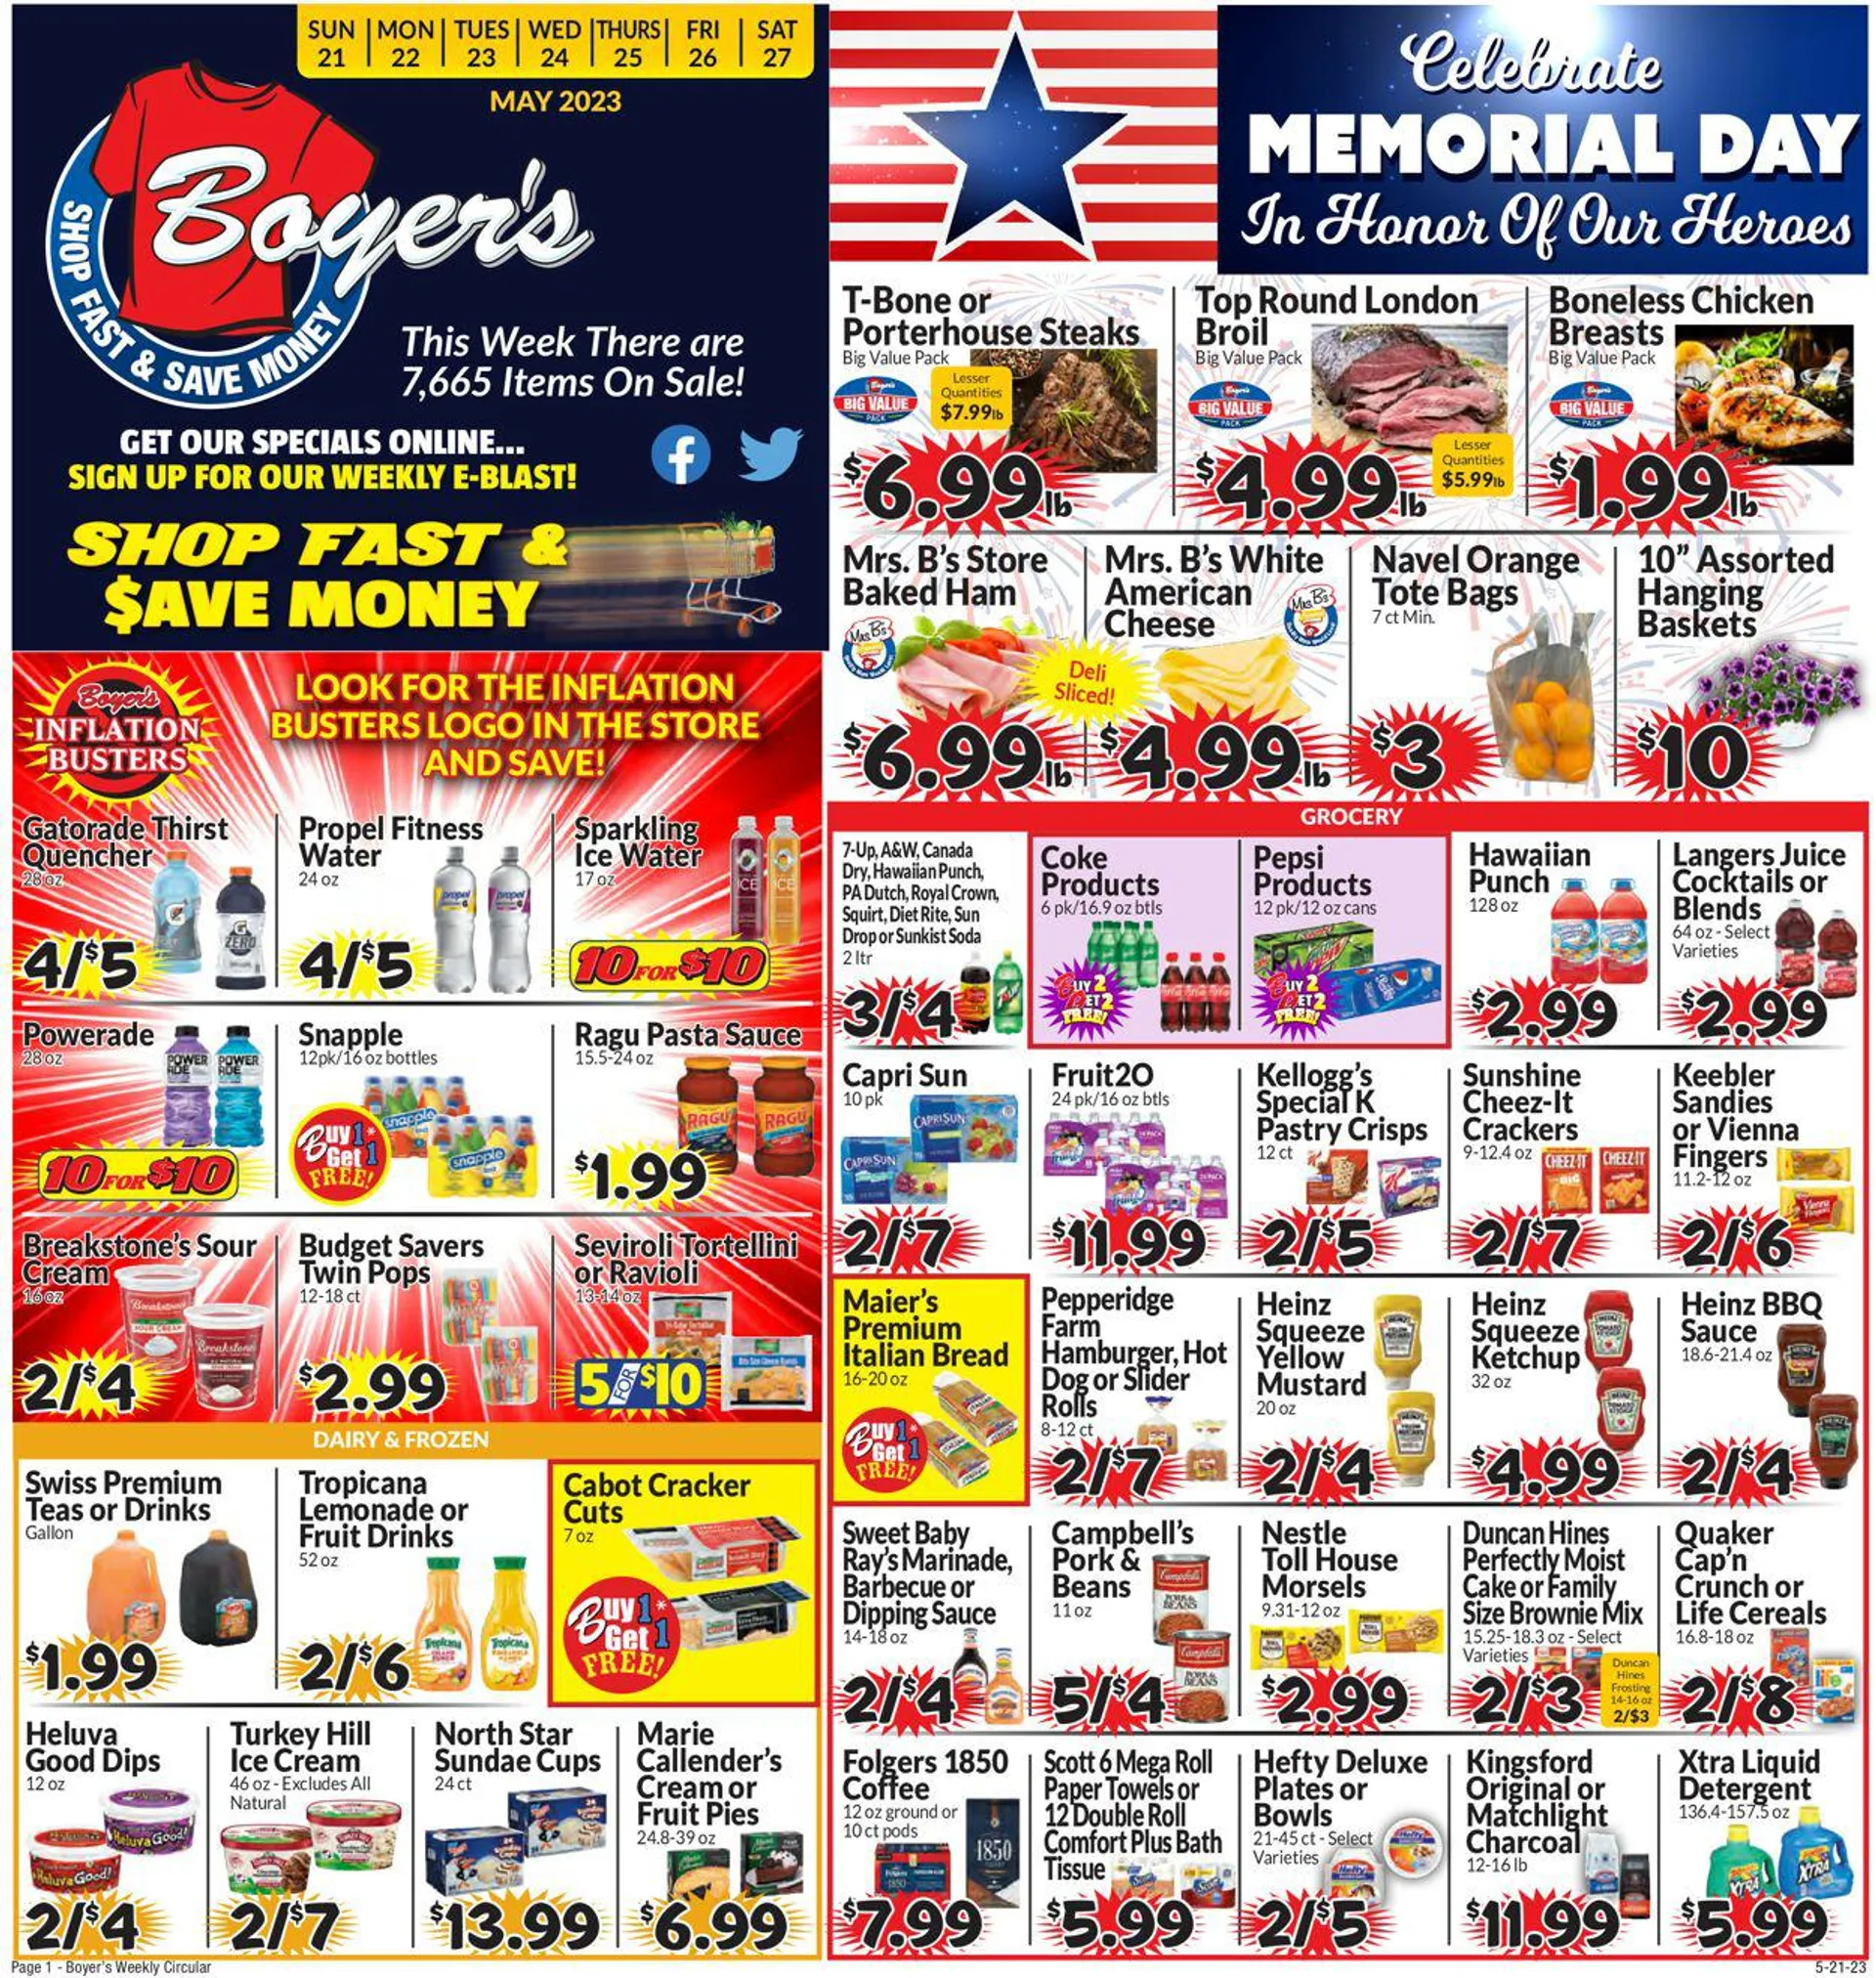 Boyers Food Markets Current weekly ad - 3